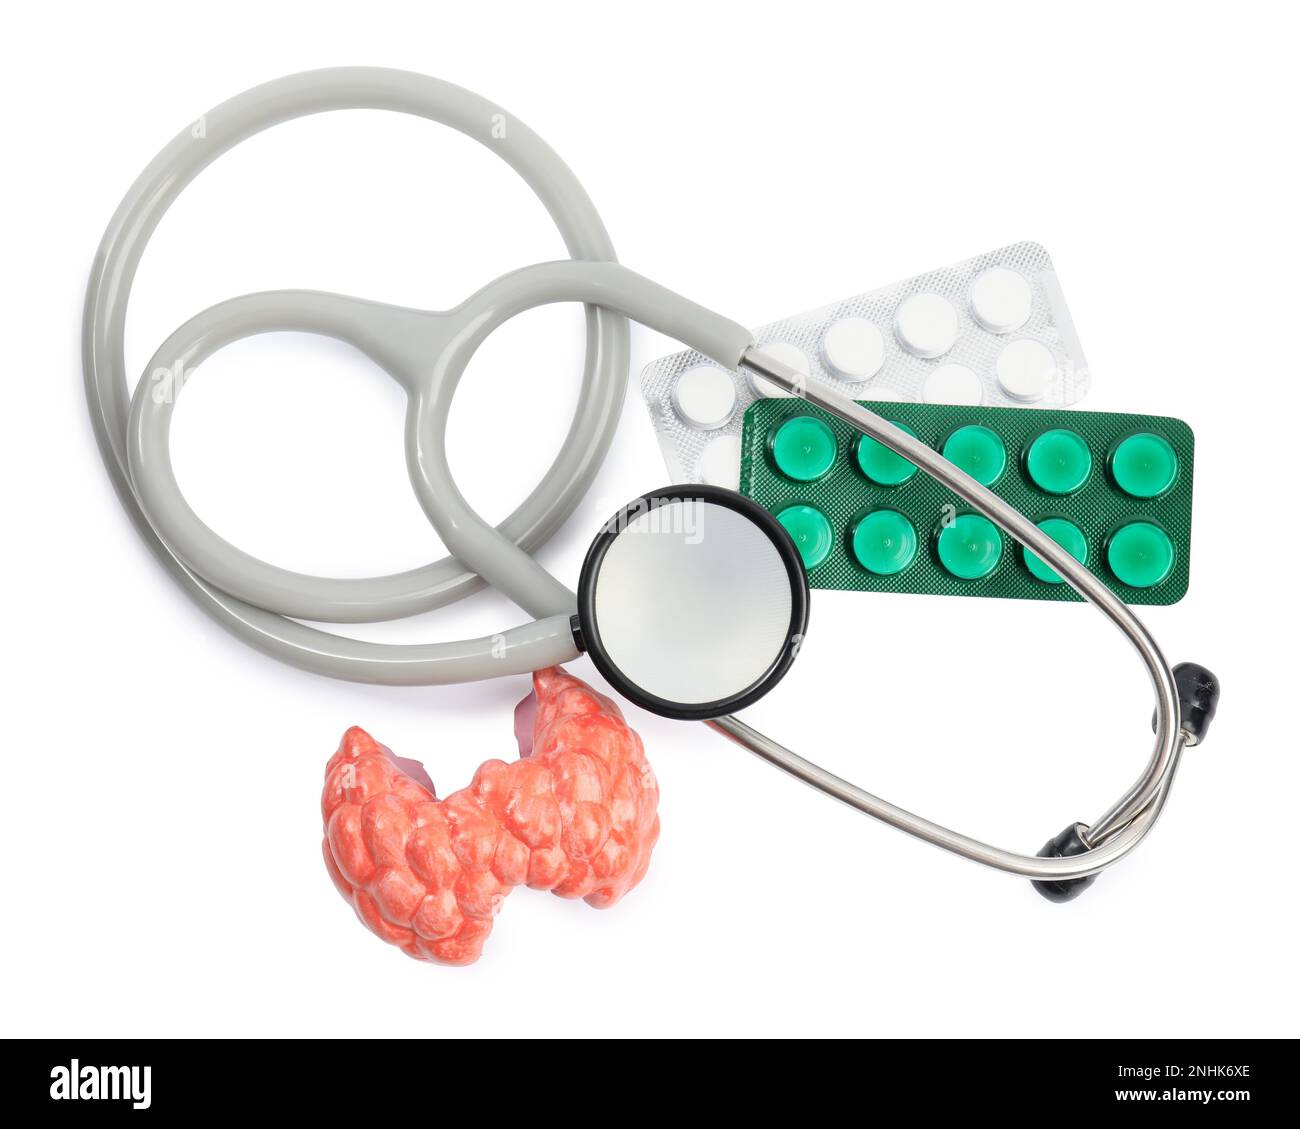 Plastic model of afflicted thyroid, pills and stethoscope on white background, top view Stock Photo